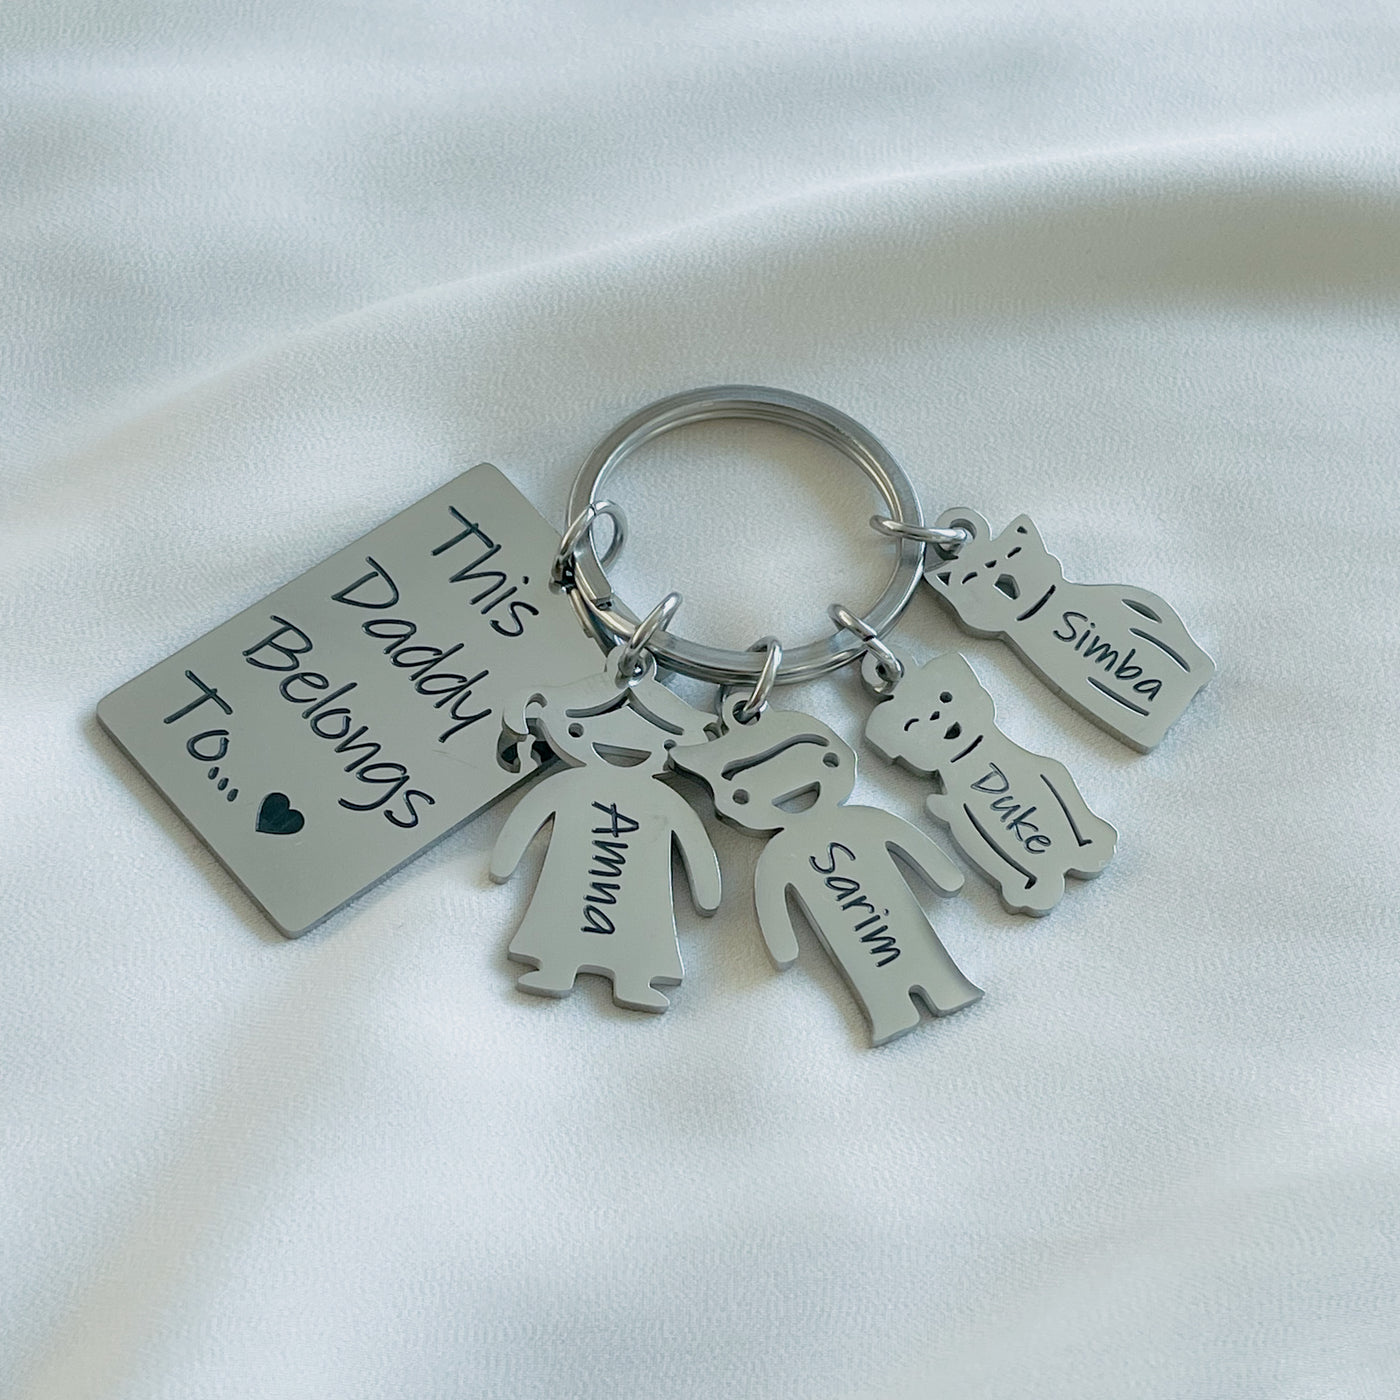 NEW KEYRING "THIS DADDY BELONGS TO...❤️" INCLUDE THE WHOLE FAMILY